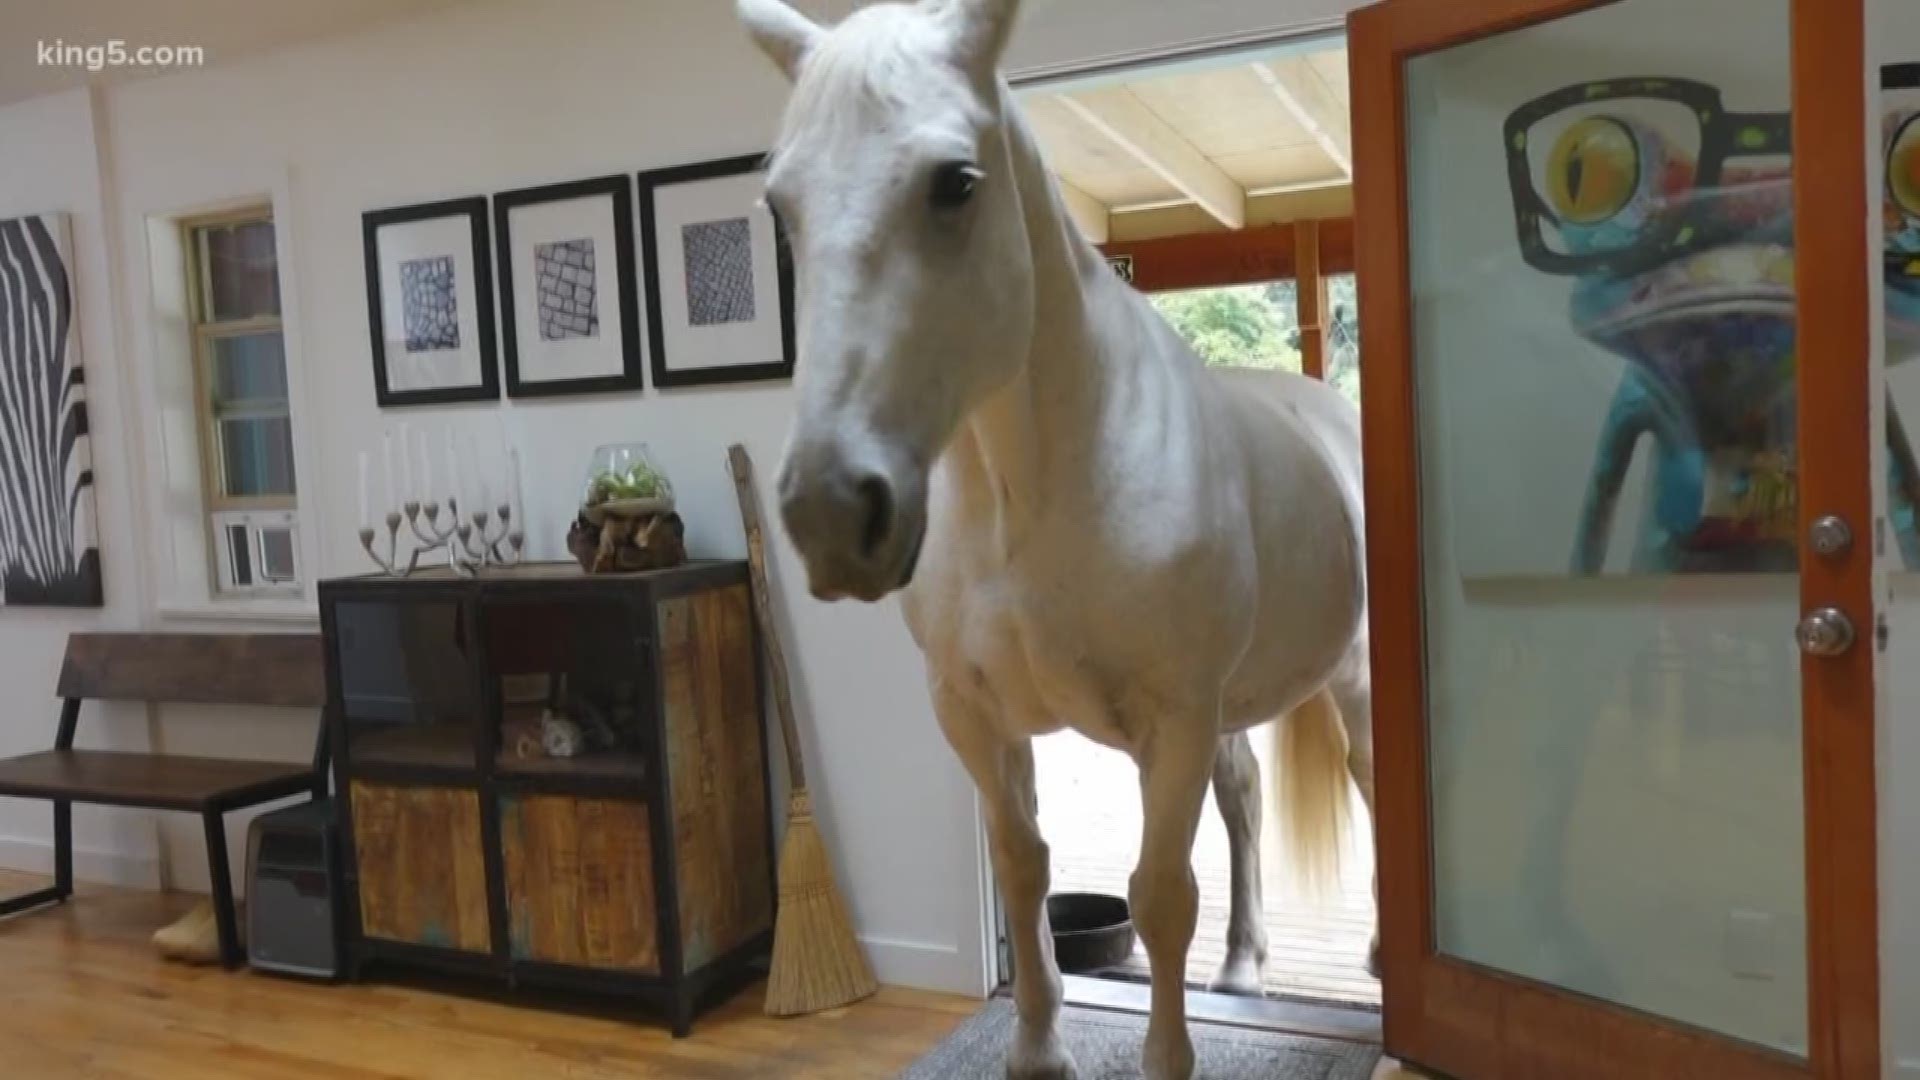 Charles and his pet horse, Amerigo, have developed a unique living situation. Now the "porch unicorn" is as much a member of the family as any other pet.